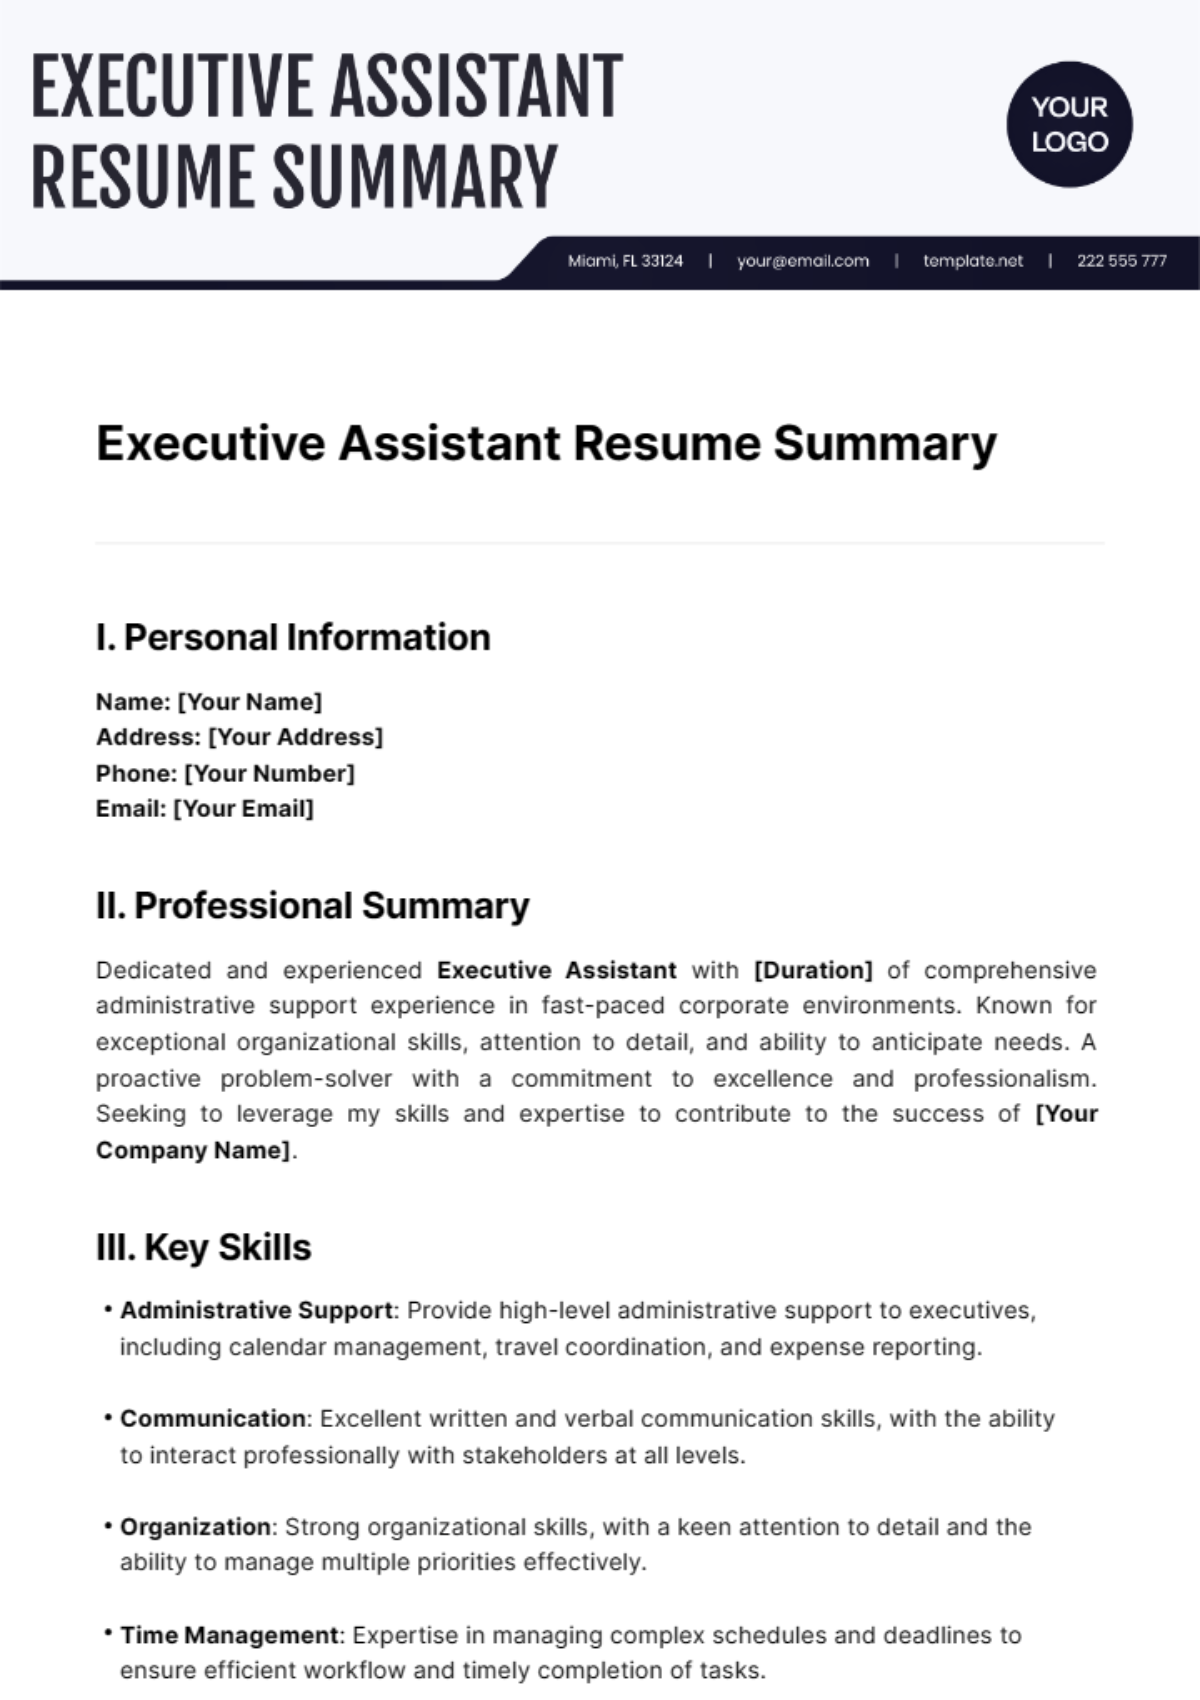 Executive Assistant Resume Summary Template